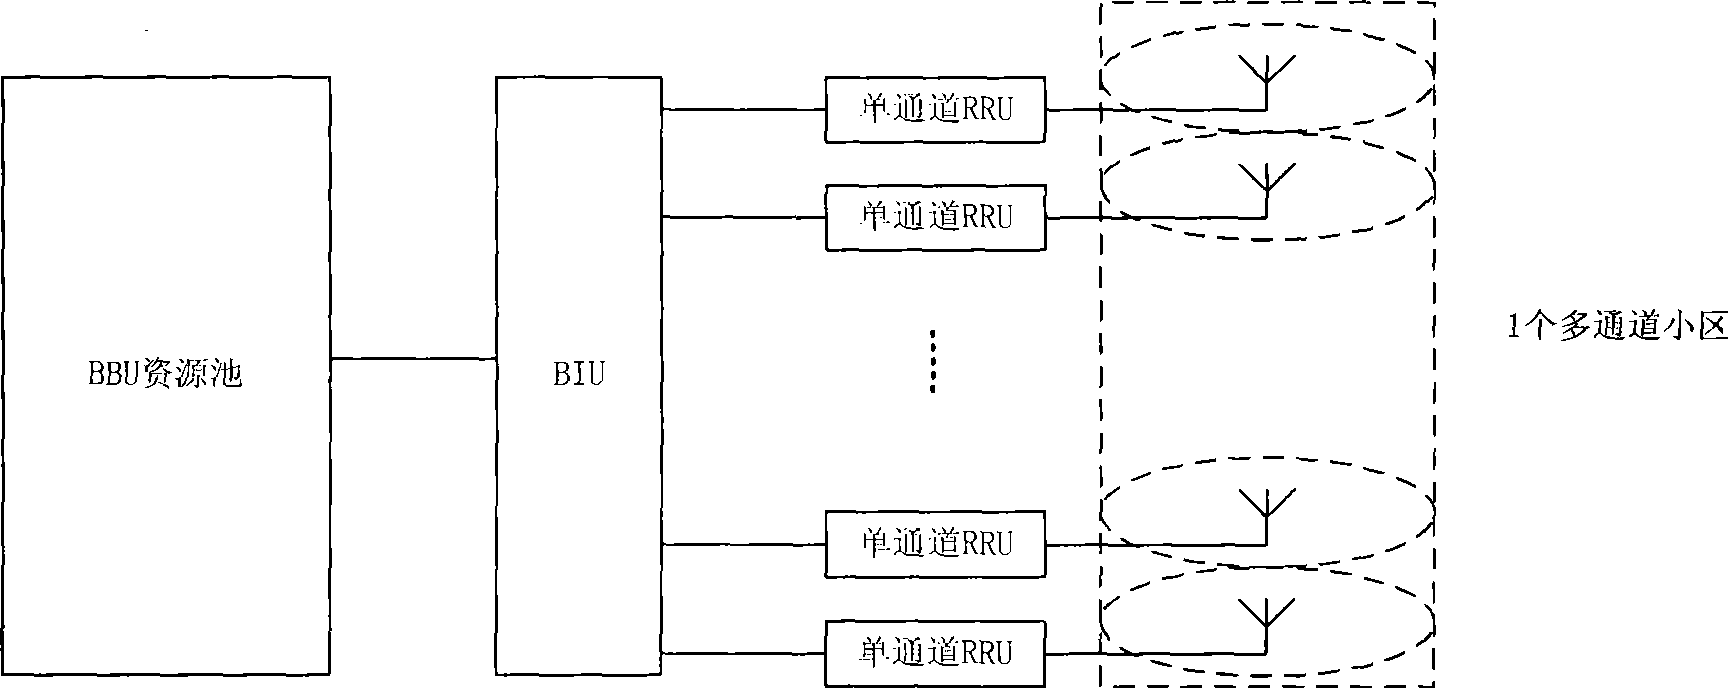 Method and system for realizing cell networking